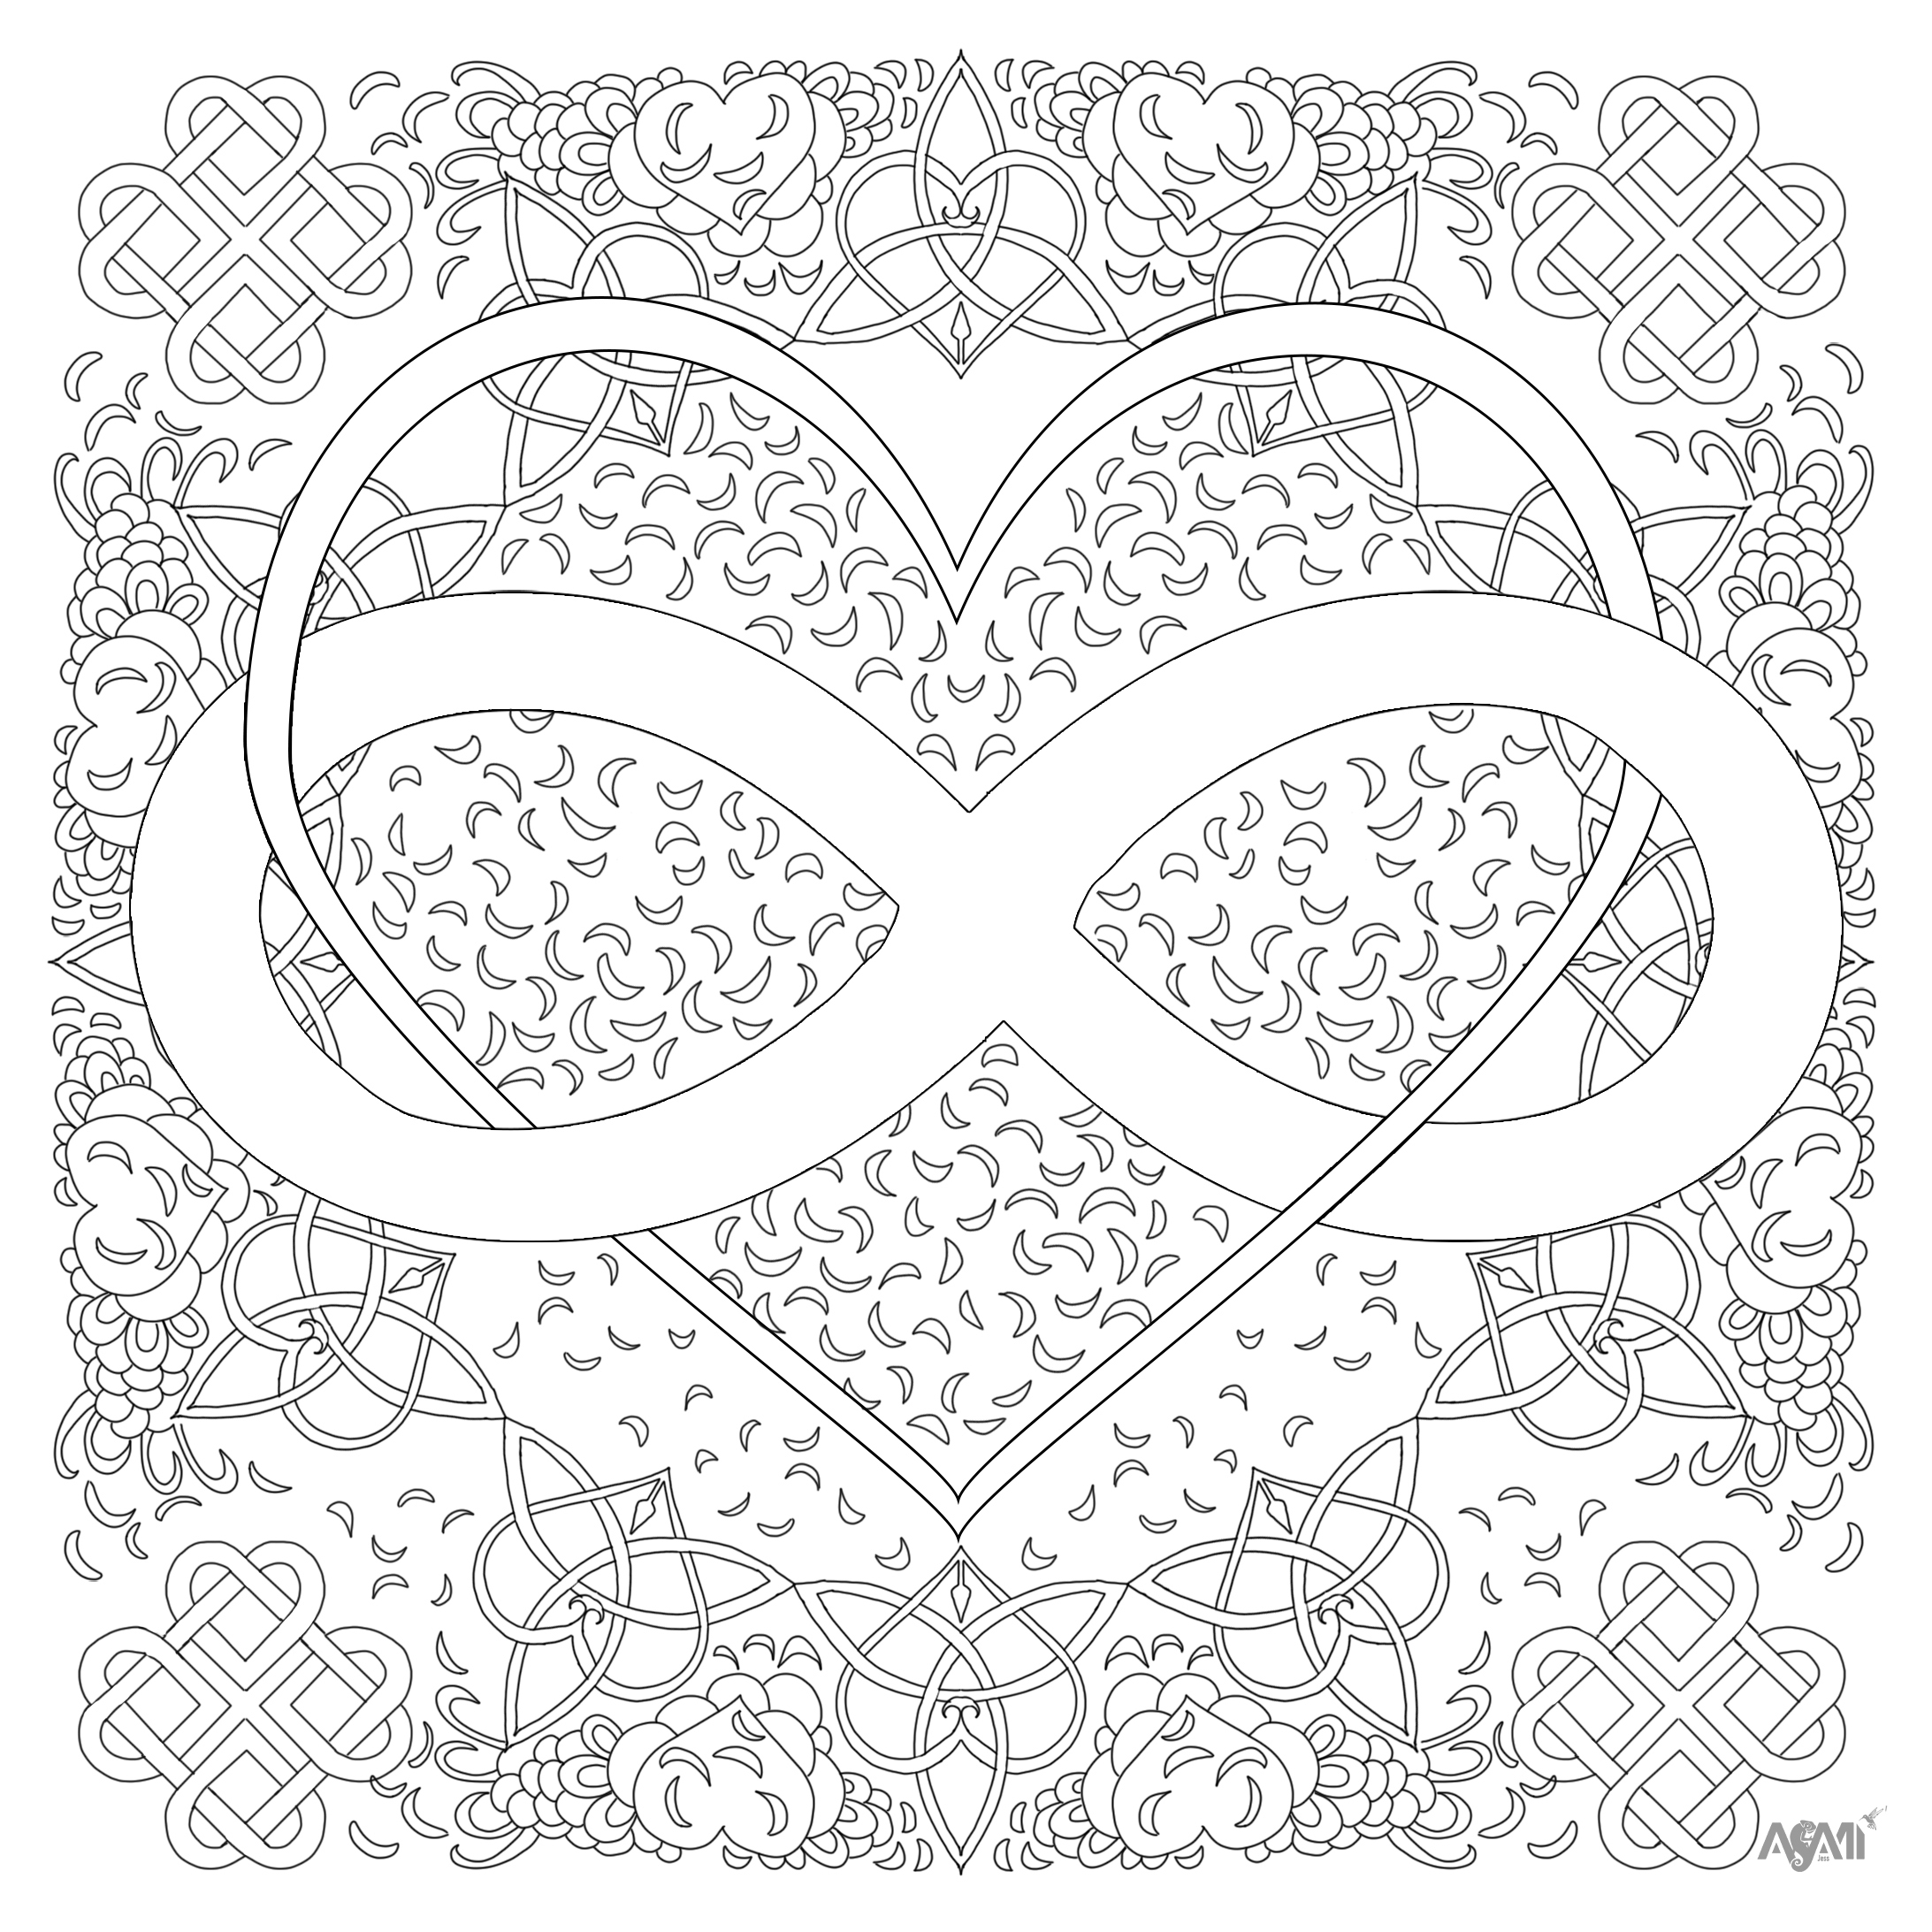 Infinity symbol and numerous motifs. This coloring is a reminder of the infinity and complexity of our world.It's a symbol of the eternity and beauty that lies in every moment, Artist : Jessica Masia